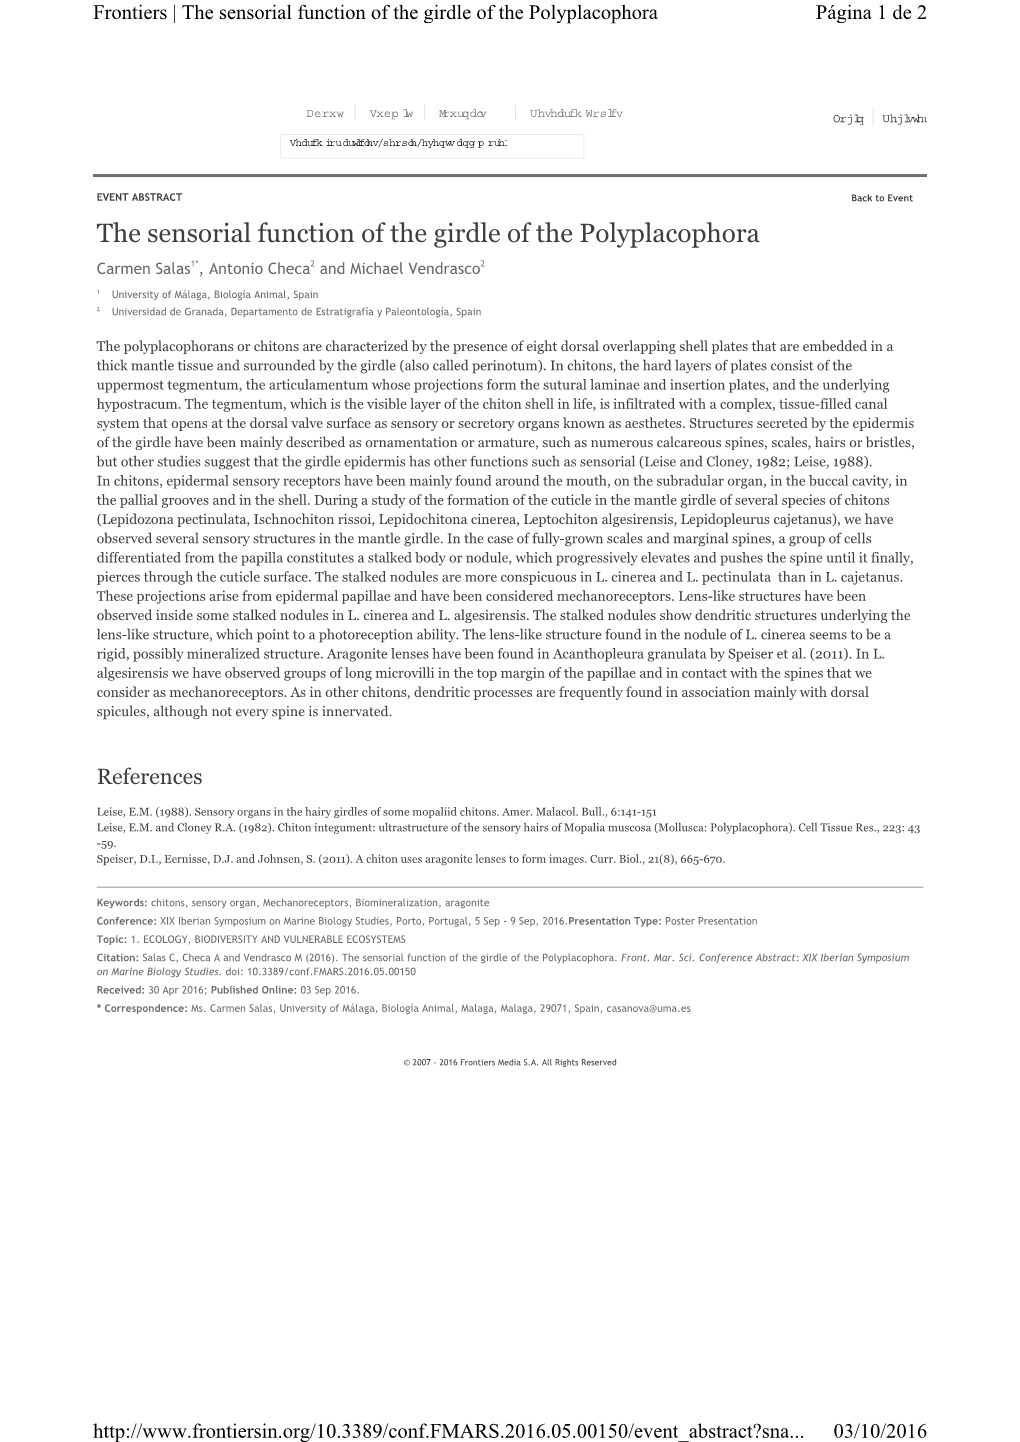 Salas Et Al. the Sensorial Function of the Girdle of the Polyplacophora